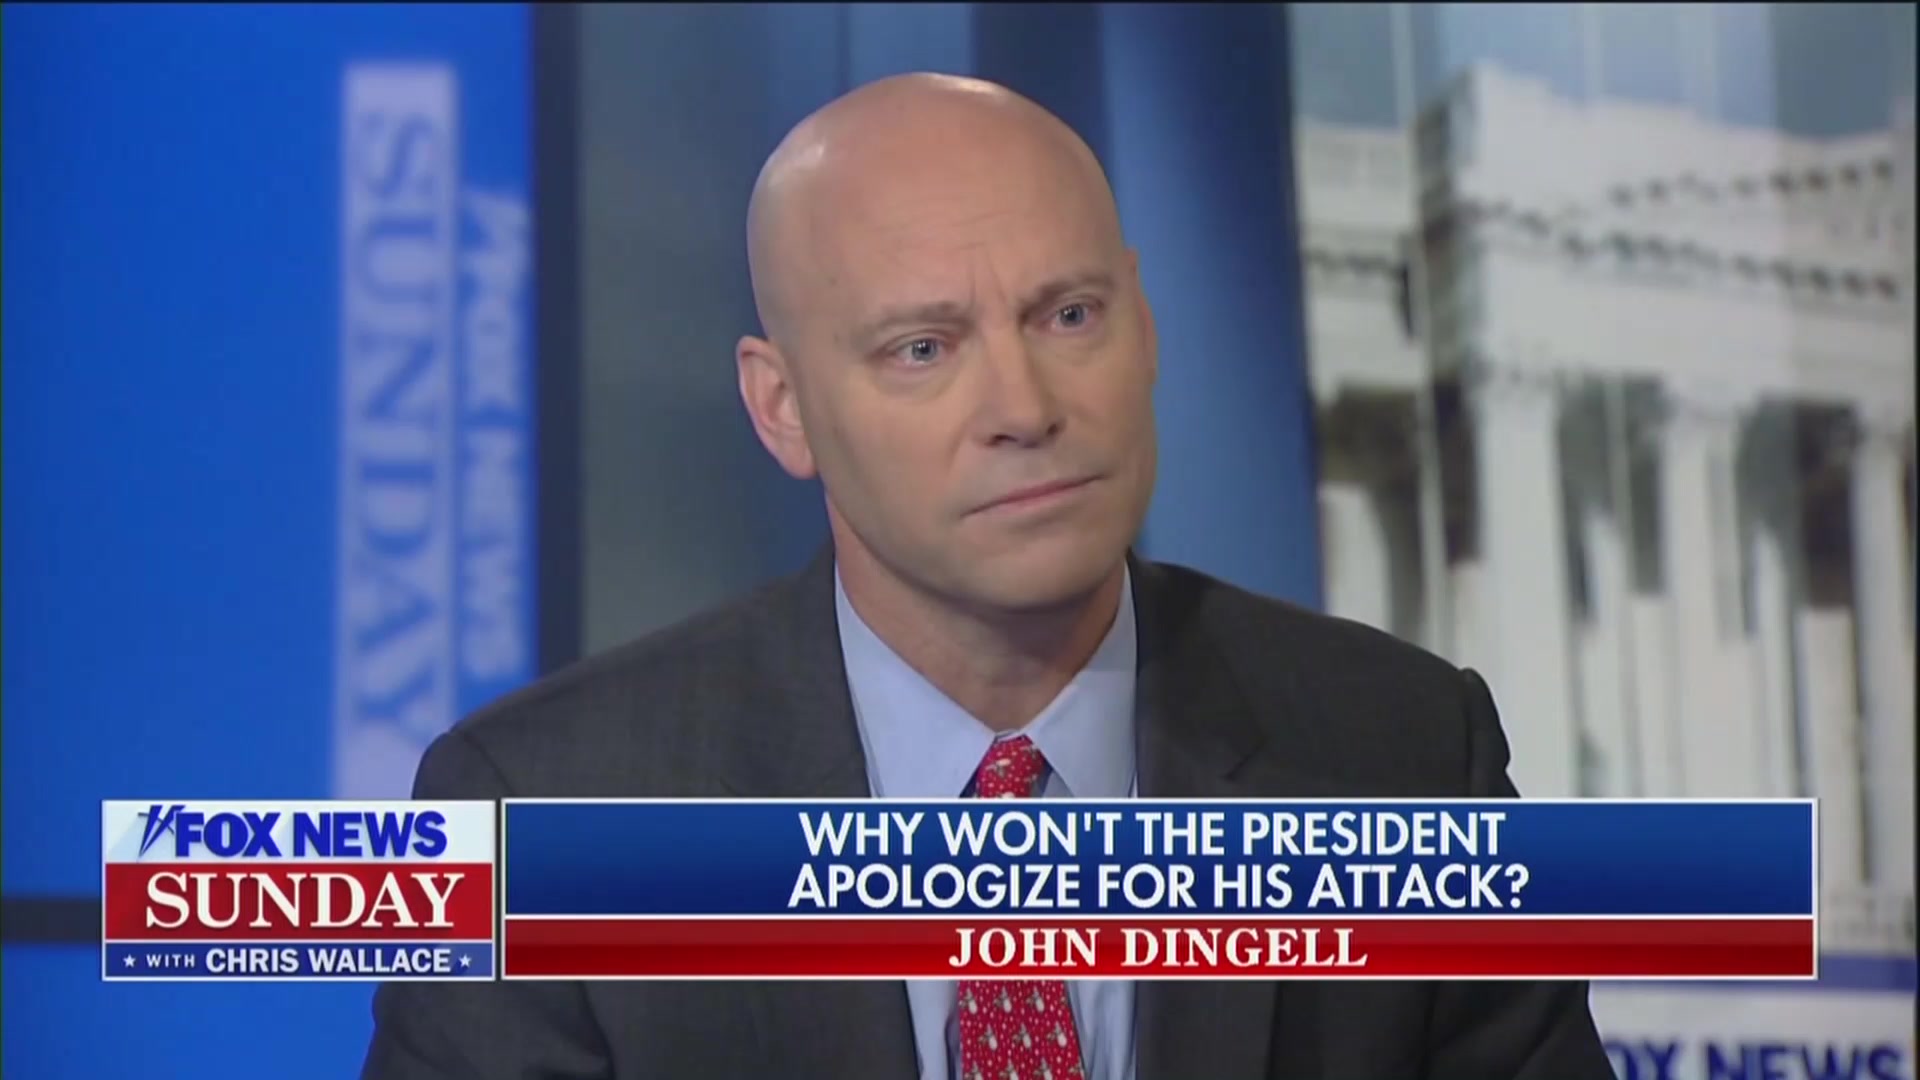 Pence’s Chief of Staff Doesn’t Have a Problem with Trump’s Attack on John Dingell